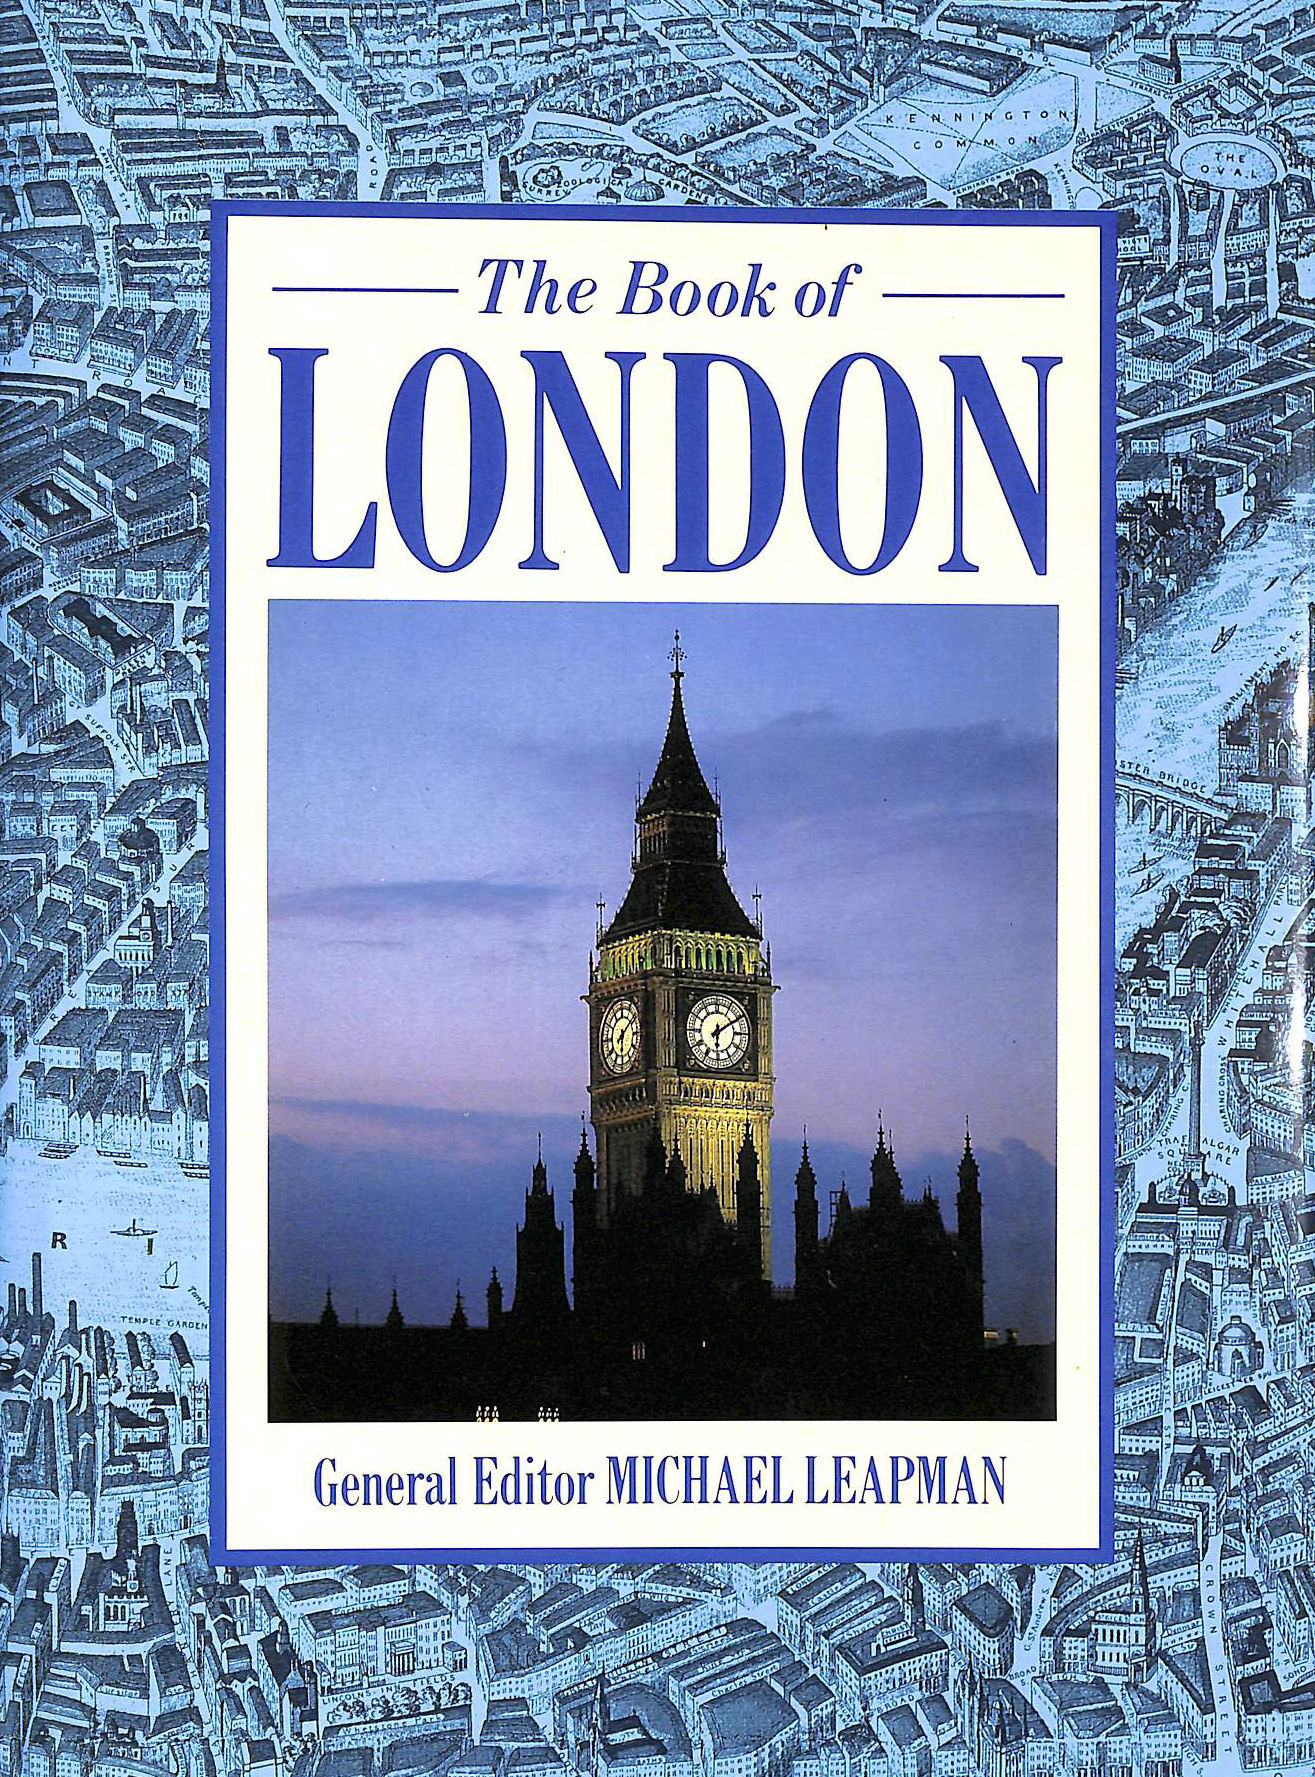 MICHAEL LEAPMAN - THE BOOK OF LONDON